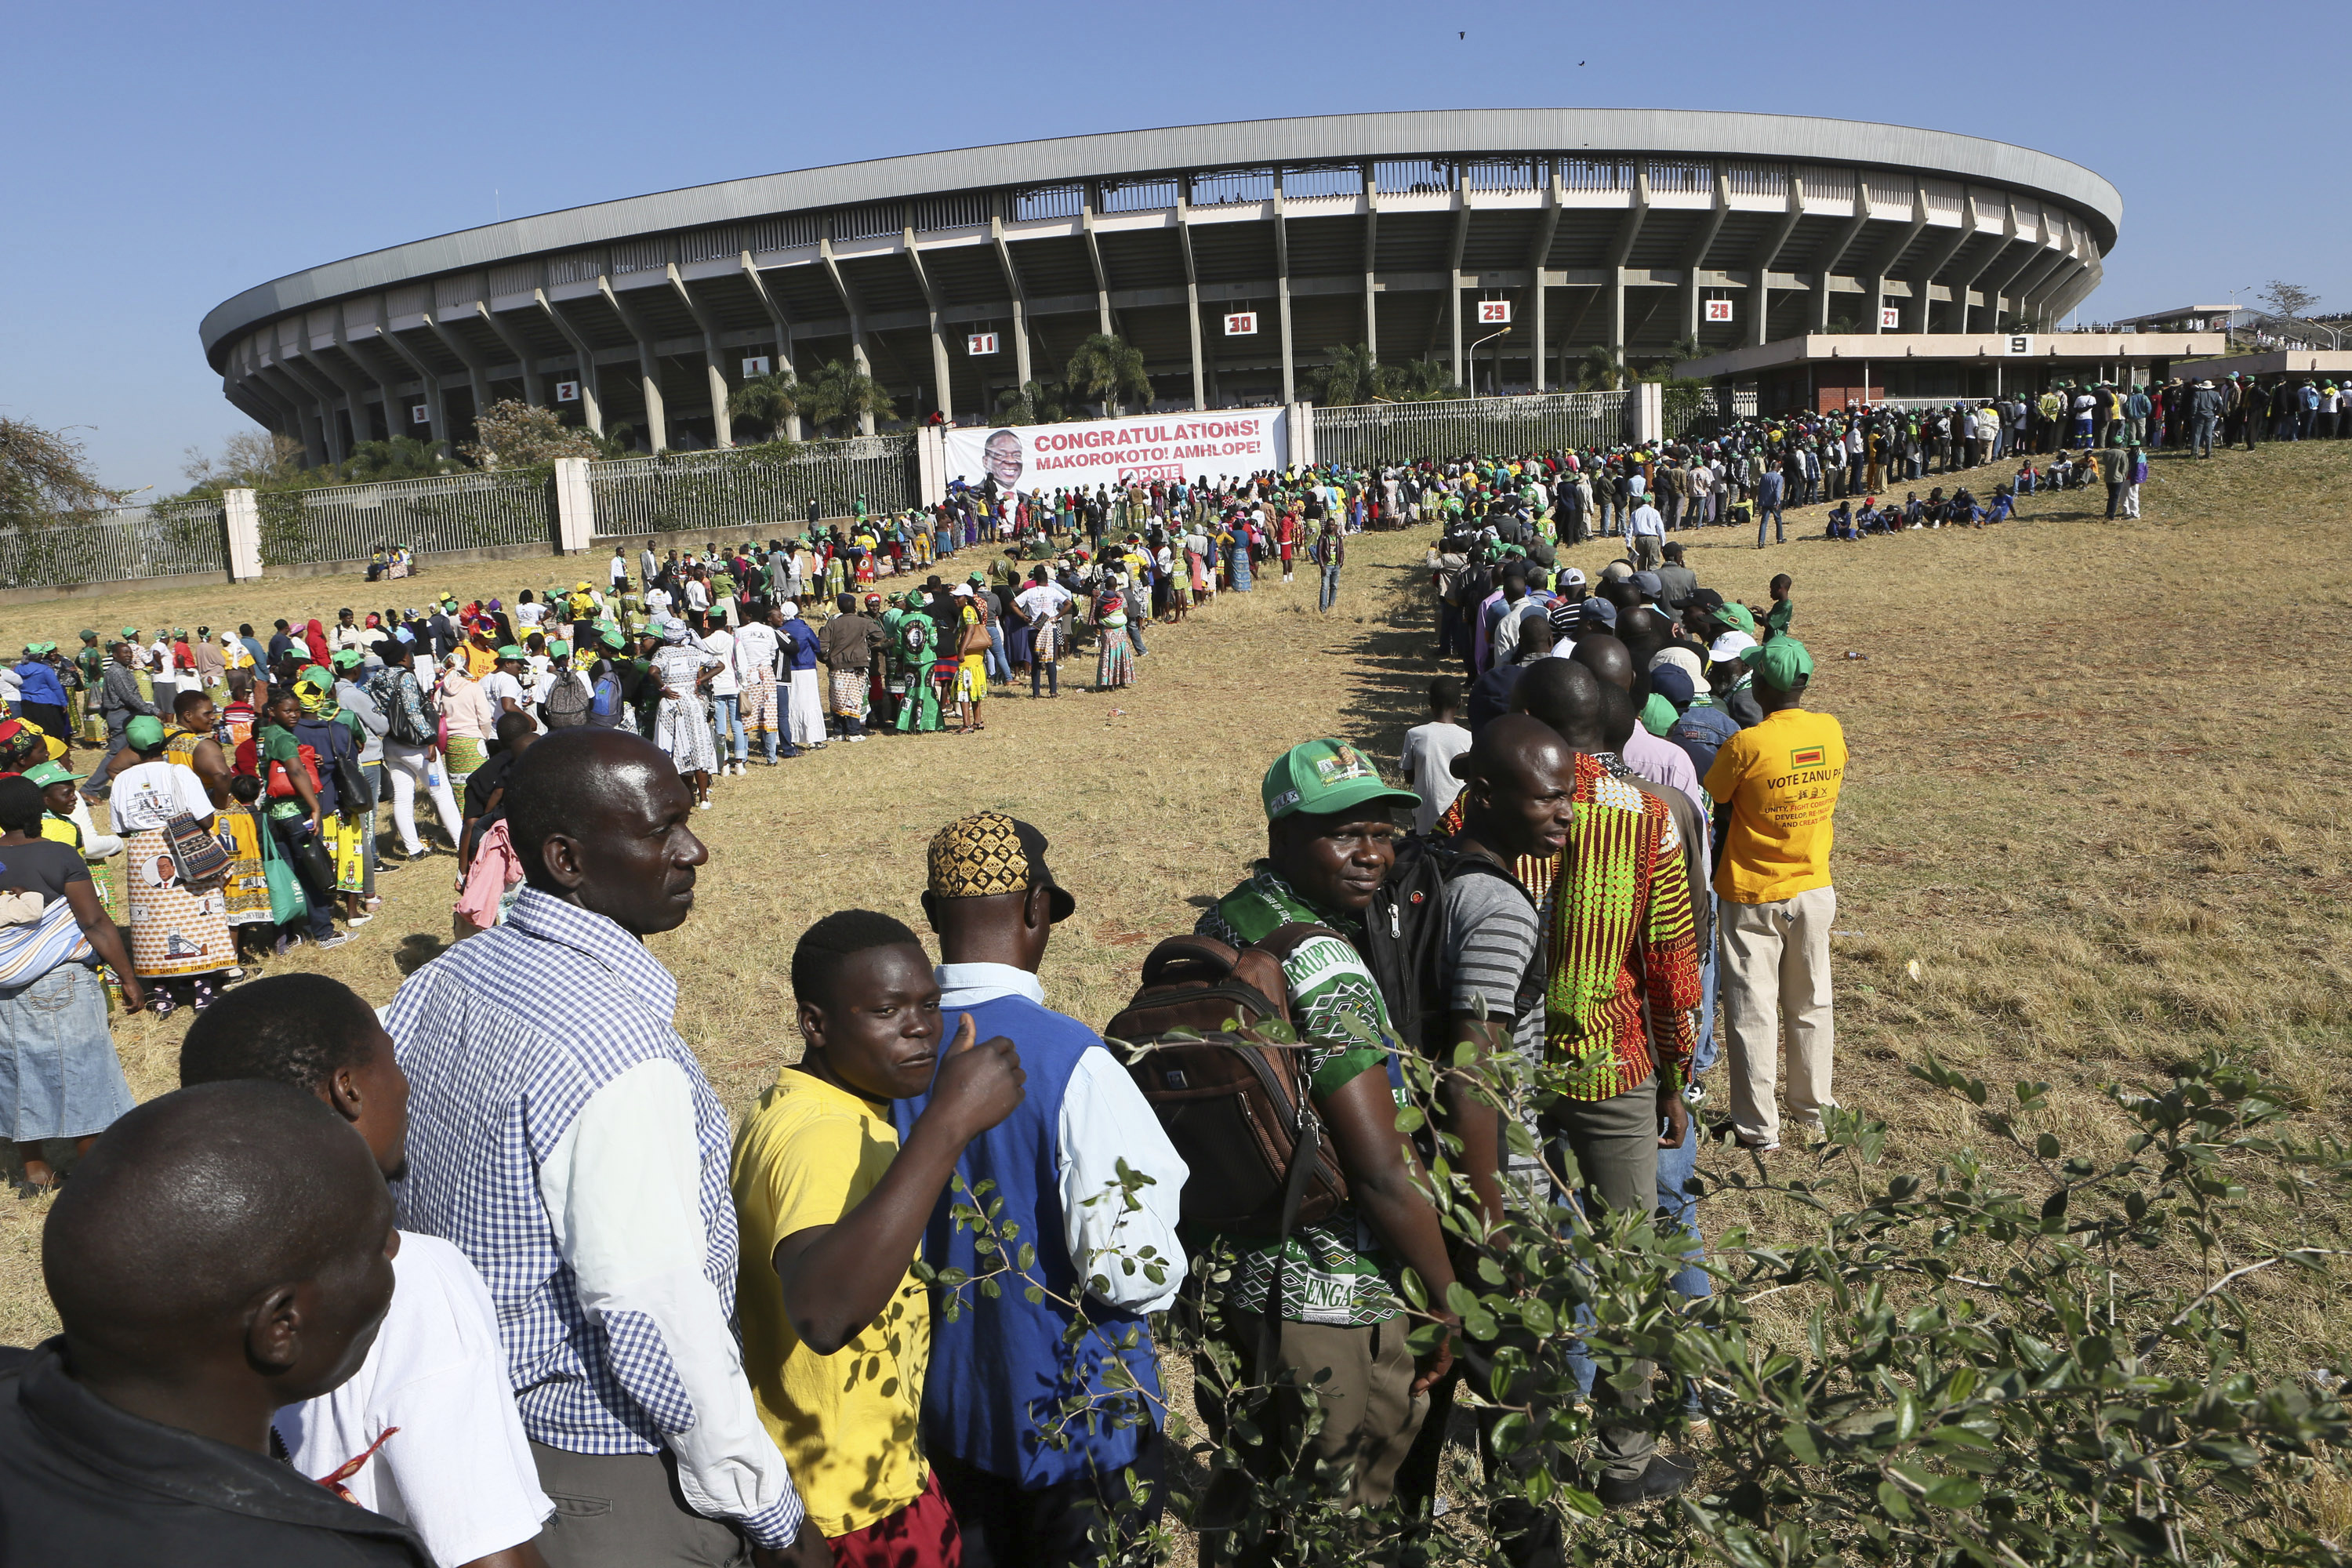 People queue for the inauguration ceremony of Zimbabwean President Emmerson Mnangagwa, at the National Sports Stadium in Harare